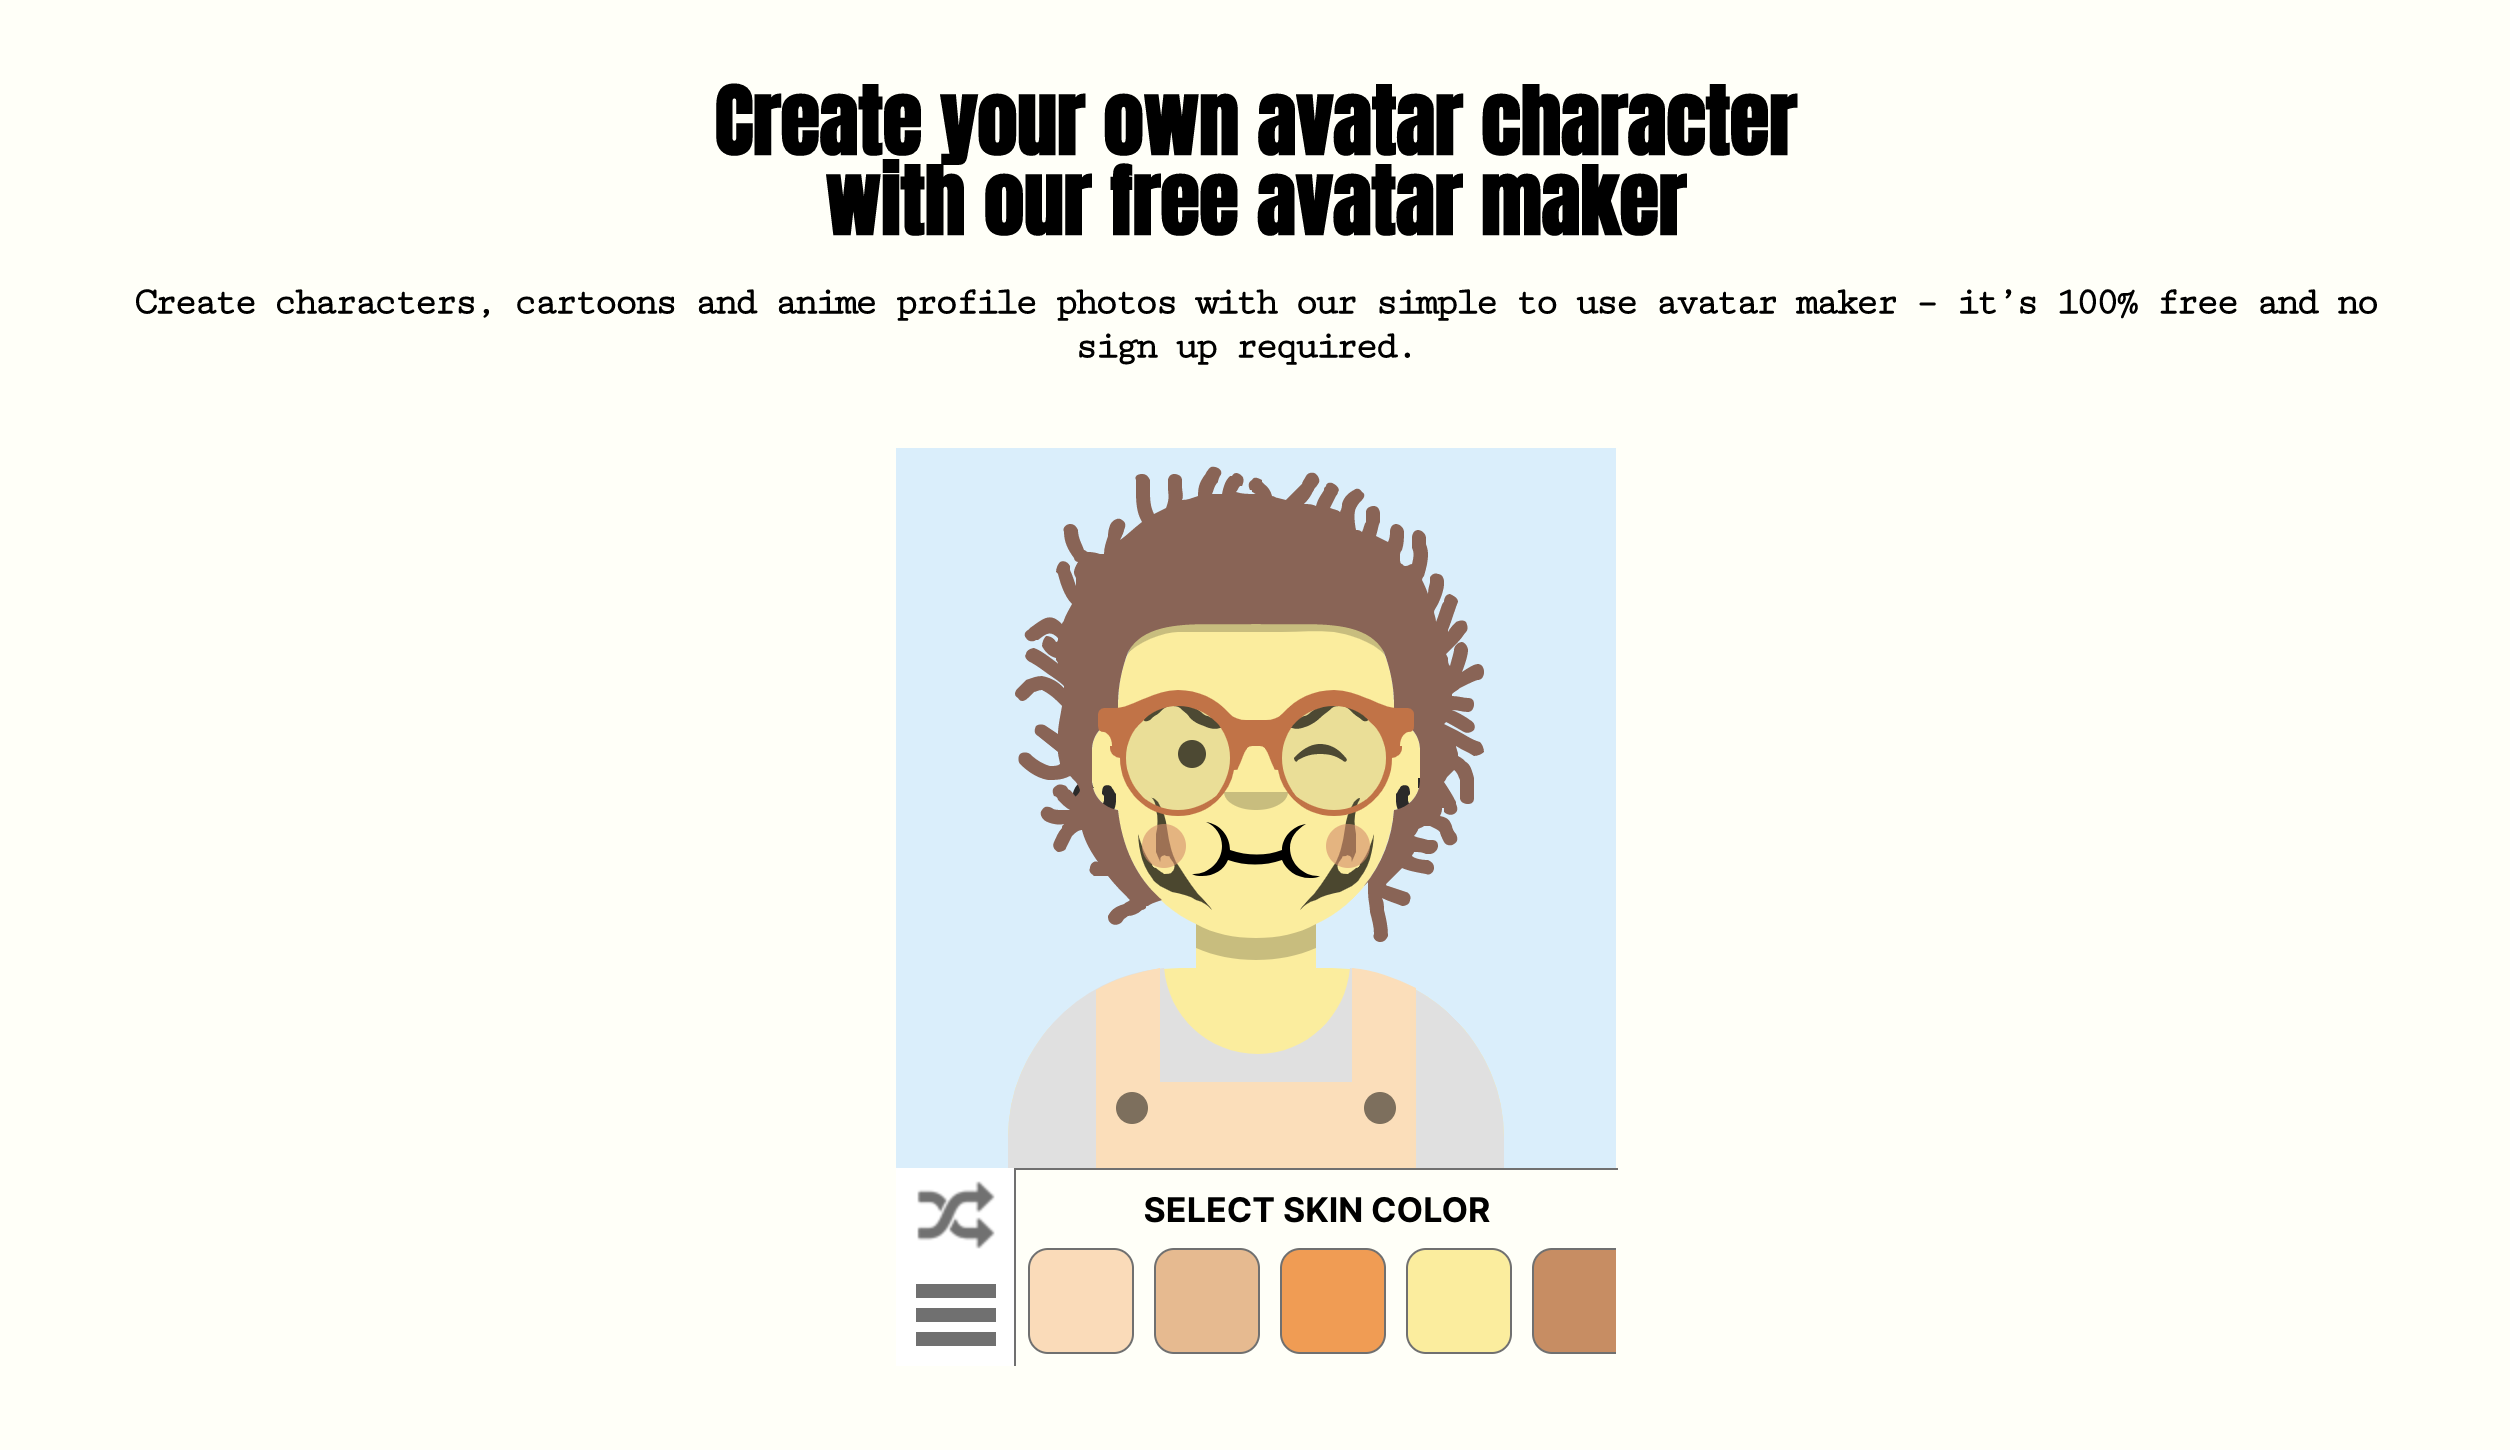 7 Best Anime Character Creator Sites Online to Make Your Own - Avatoon